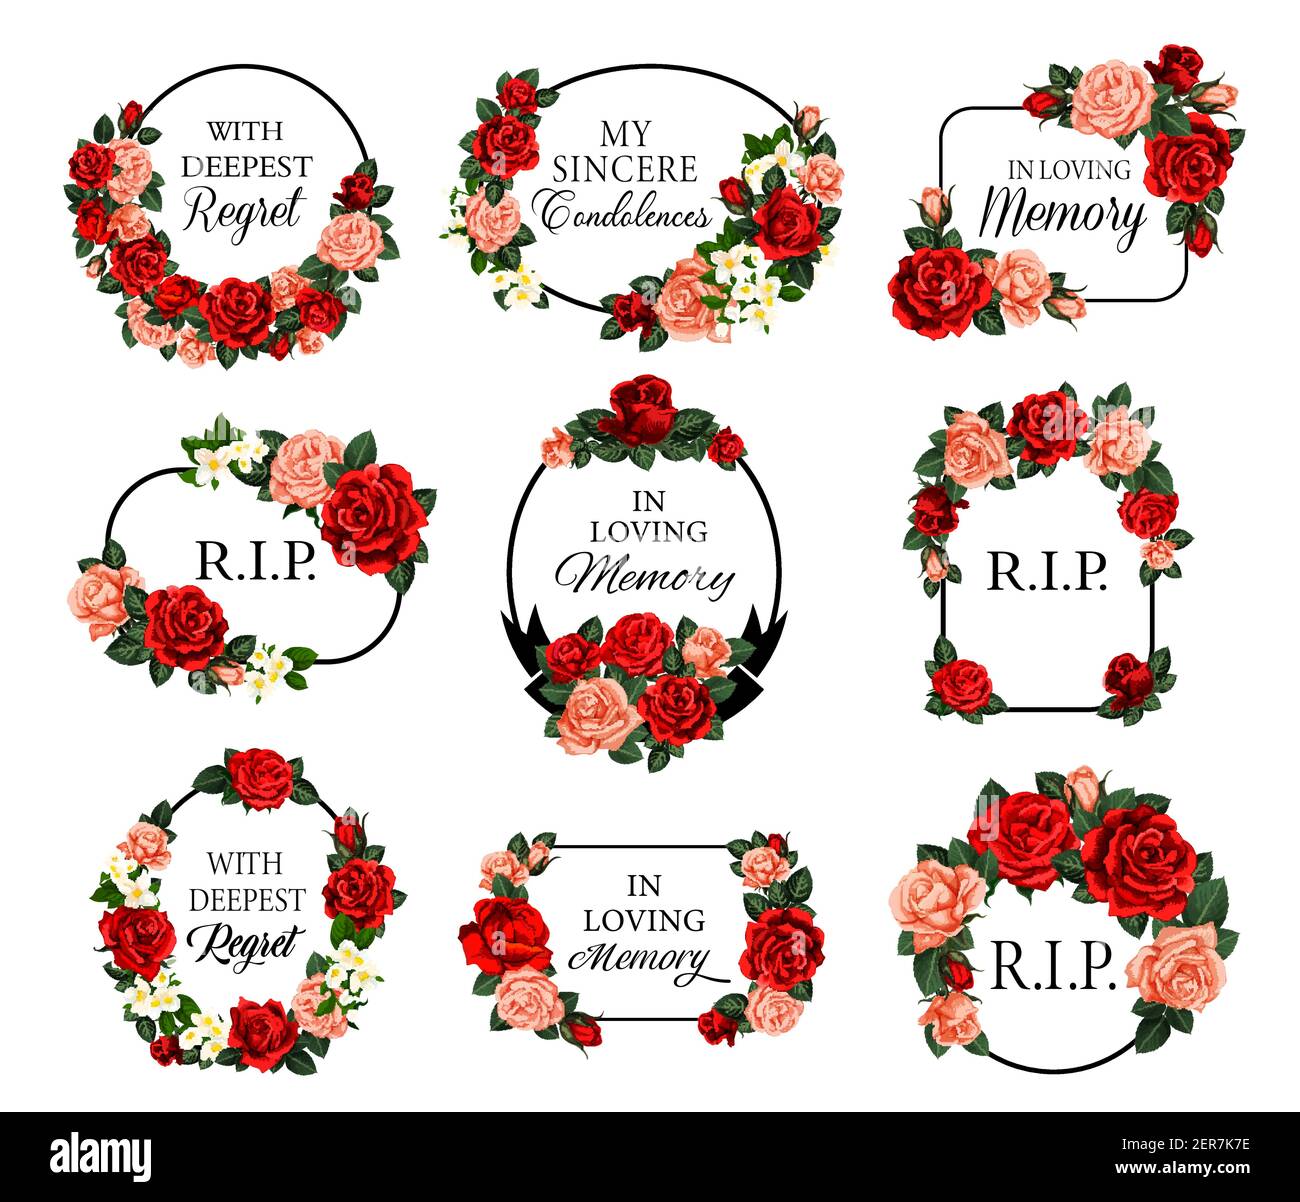 Funeral frames with red roses flowers and condolences. Obituary memorial vector frames with RIP rest in peace, in loving memory condolences and floral Stock Vector